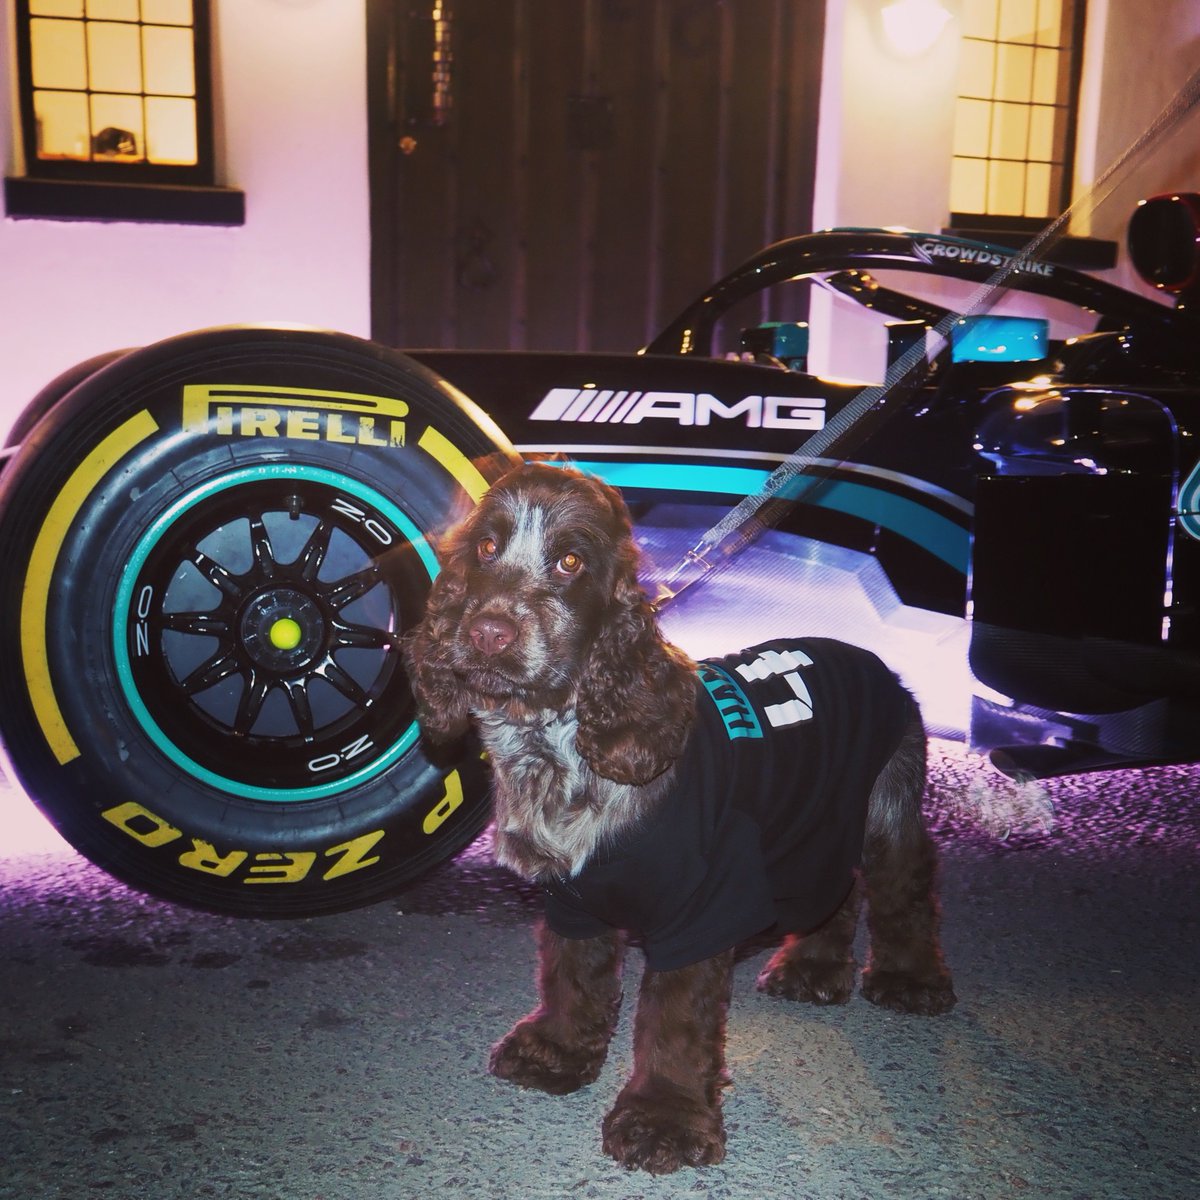 Nearly bed time for a doggo, but couldn’t resist one last hangout with the @MercedesAMGF1 car. @CaffandMac #cultofmachine @LewisHamilton